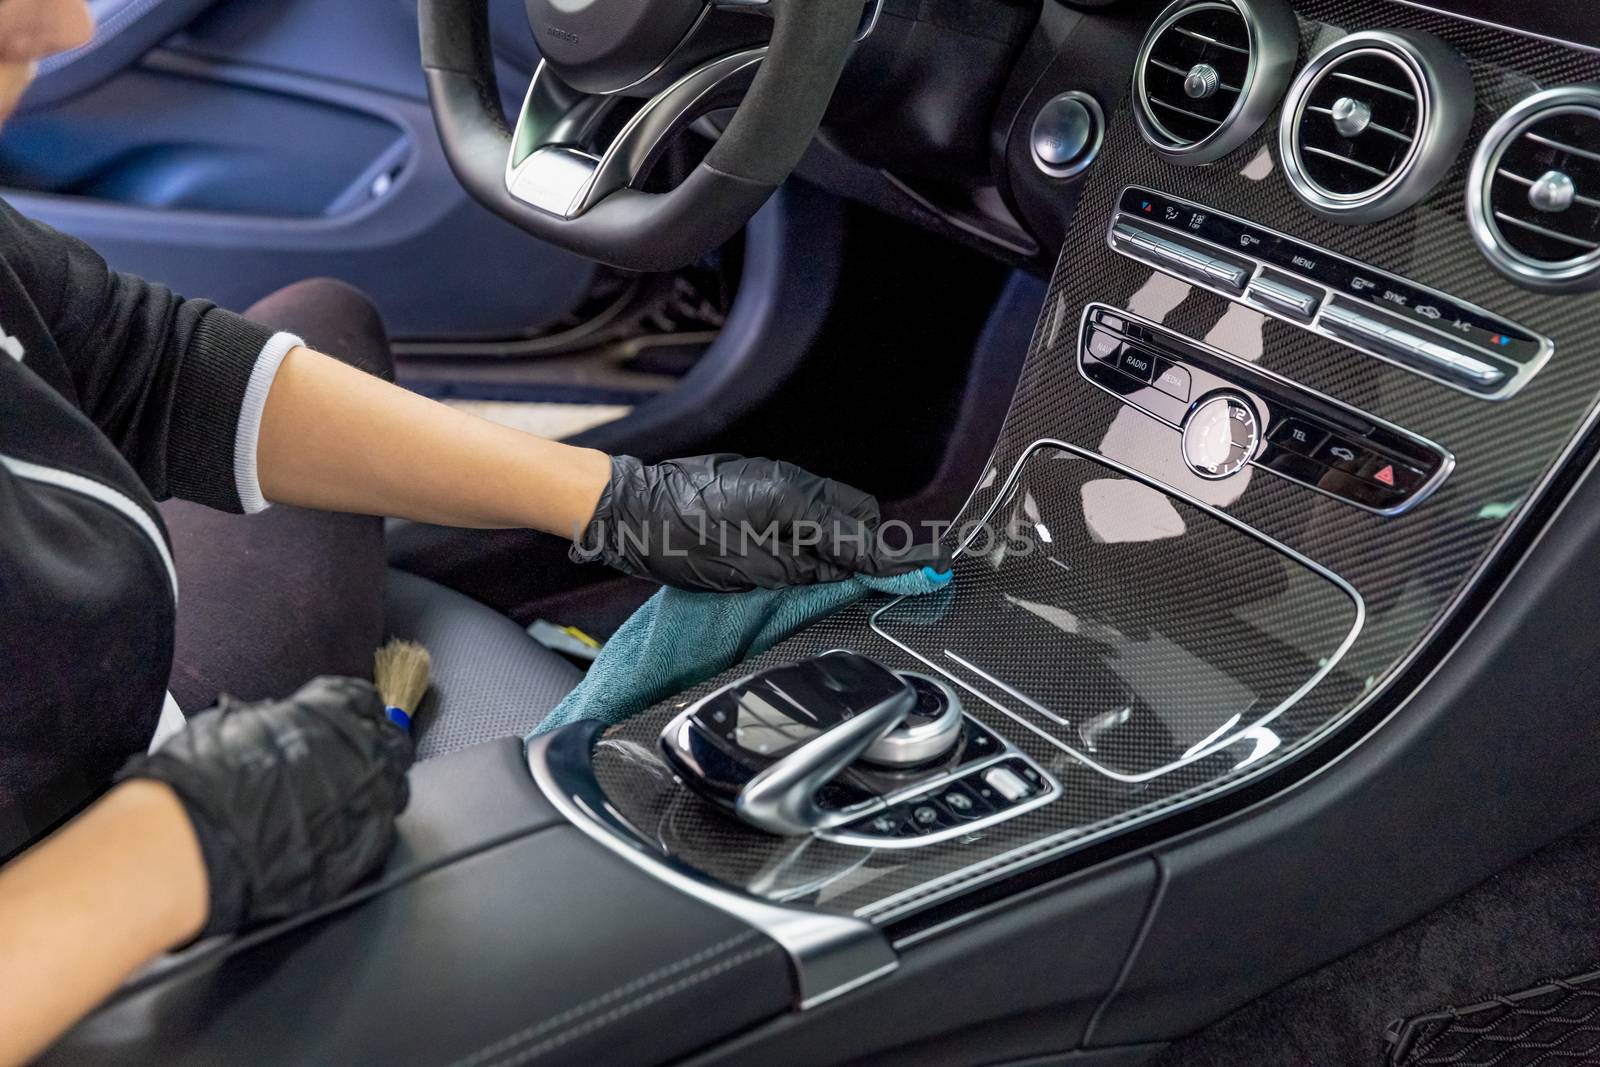 cleaning the interior of a luxury car with the help of chemistry with nanotechnology.